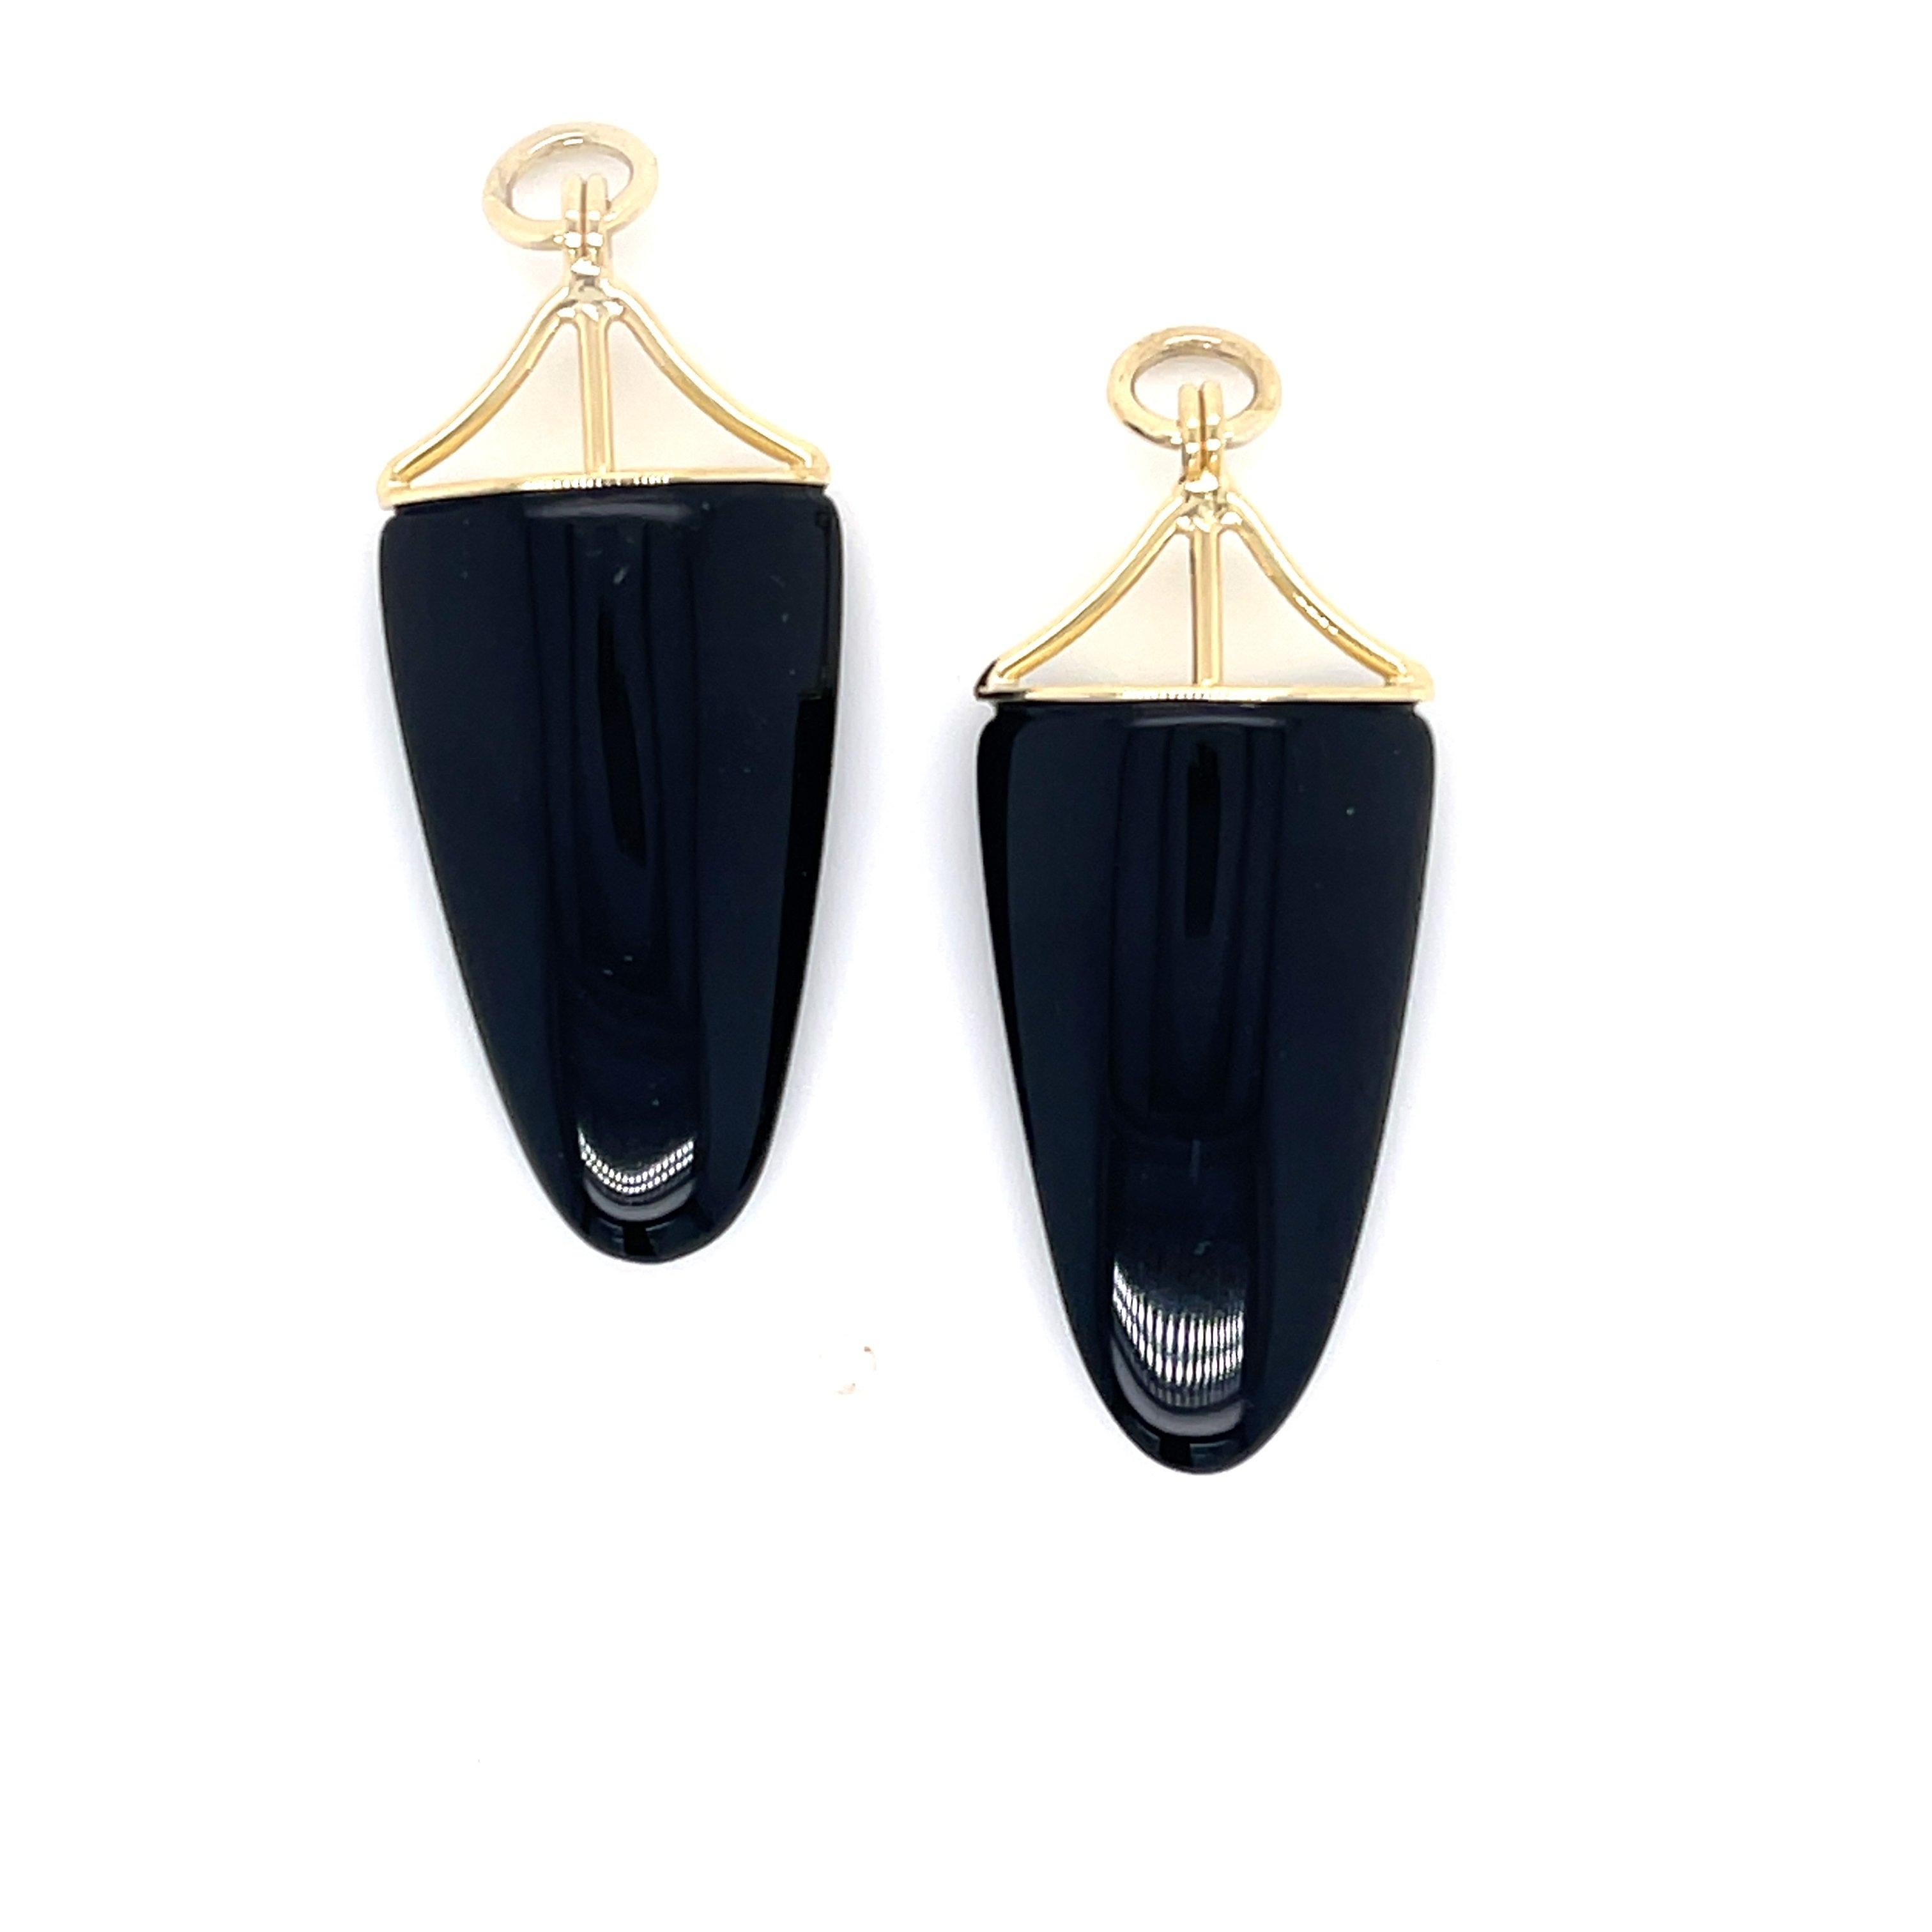 A pair of 18k white gold earring studs martini head set with 8mm round faceted onyx, with a pair of 18k yellow gold jackets set with two long bullet shaped onyx. These earrings were made an designed by llyn strong.

Items sold separately upon